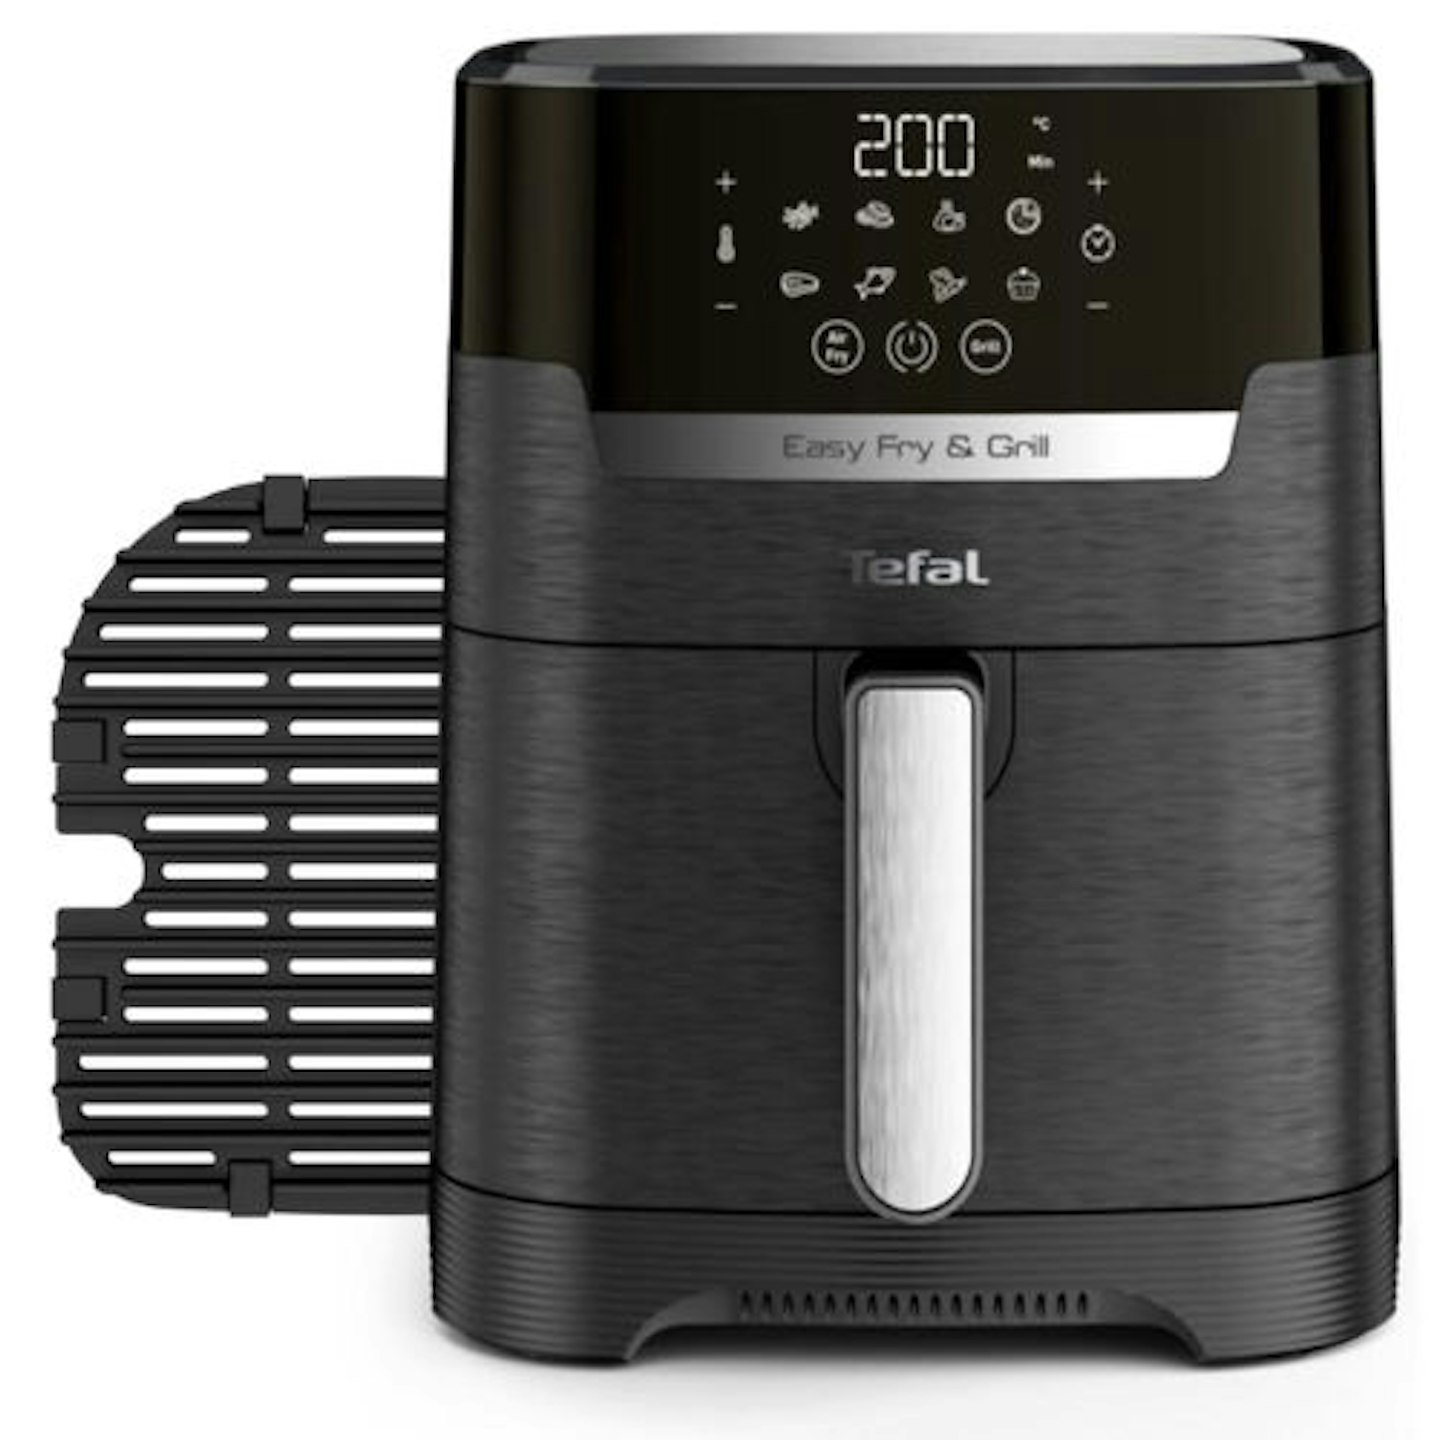 Tefal Easy Fry Precision 2-in-1 Digital Air Fryer and Grill